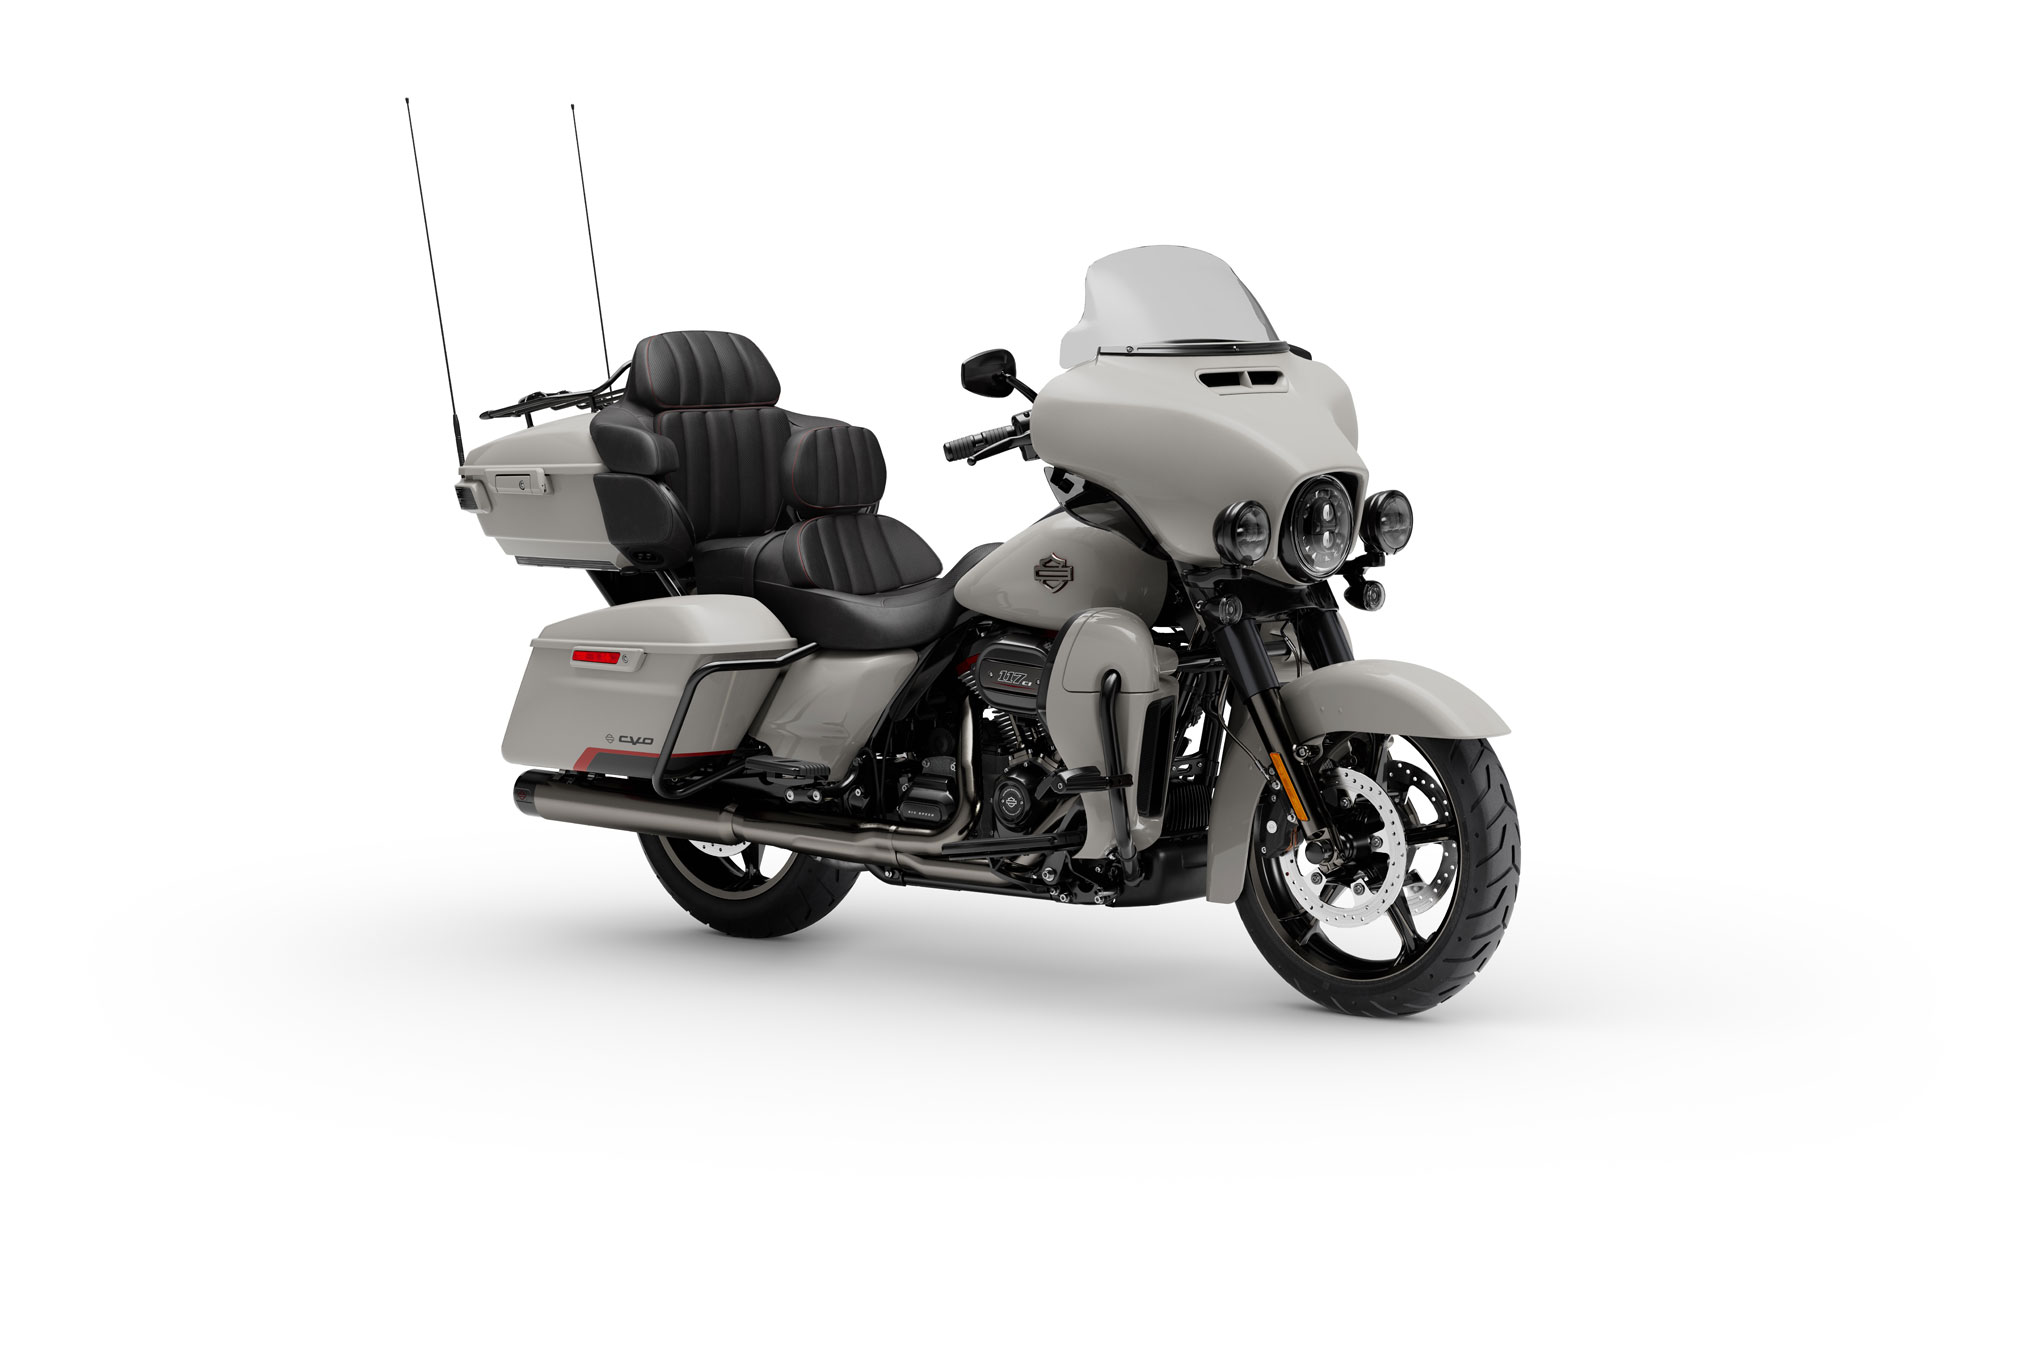 Harley Ultra Limited Cvo Promotion Off64